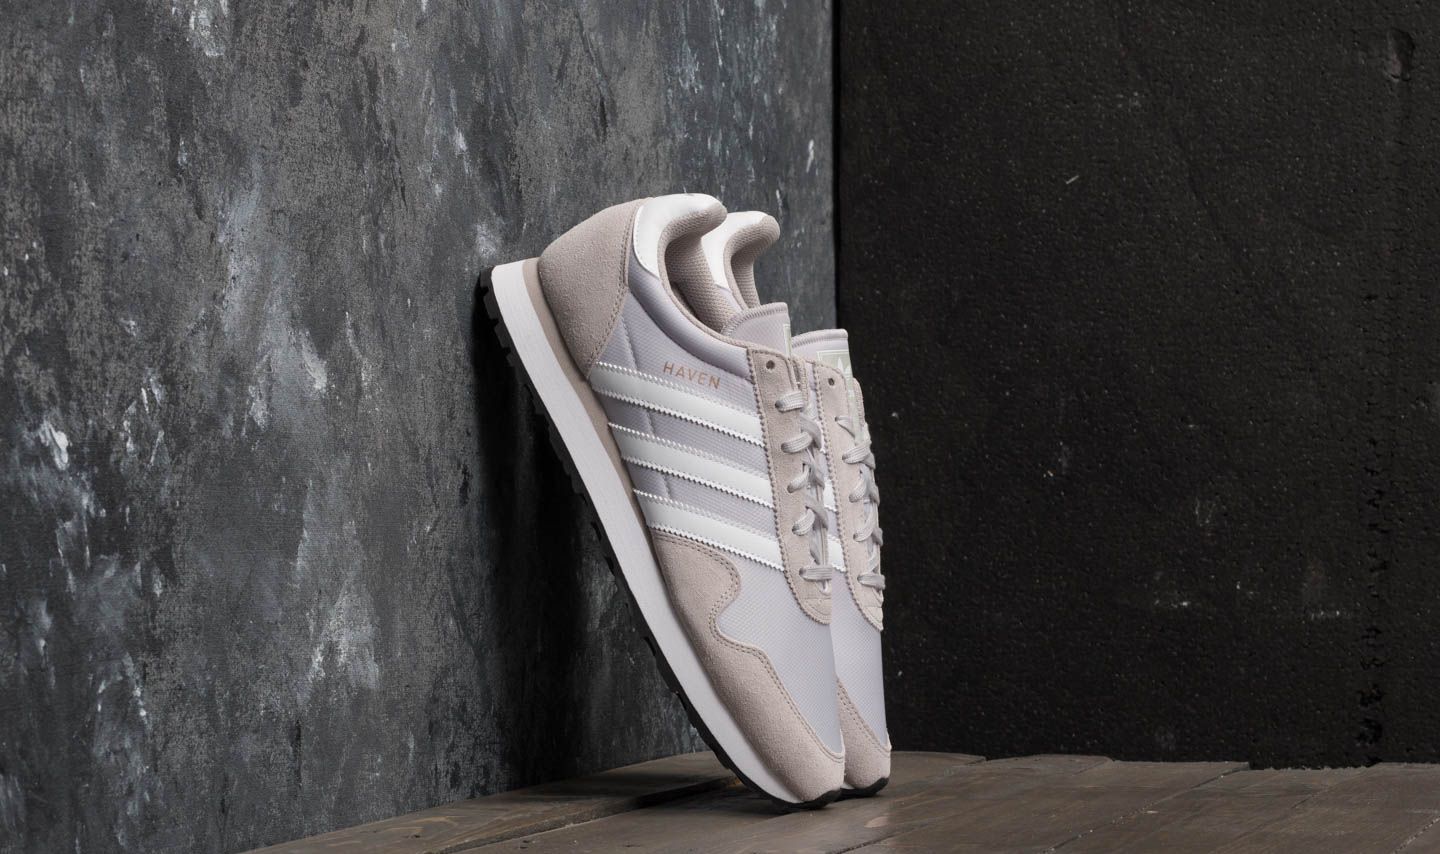 Pánske tenisky a topánky adidas Haven Light Solid Grey/ Ftw White/ Clear Granite